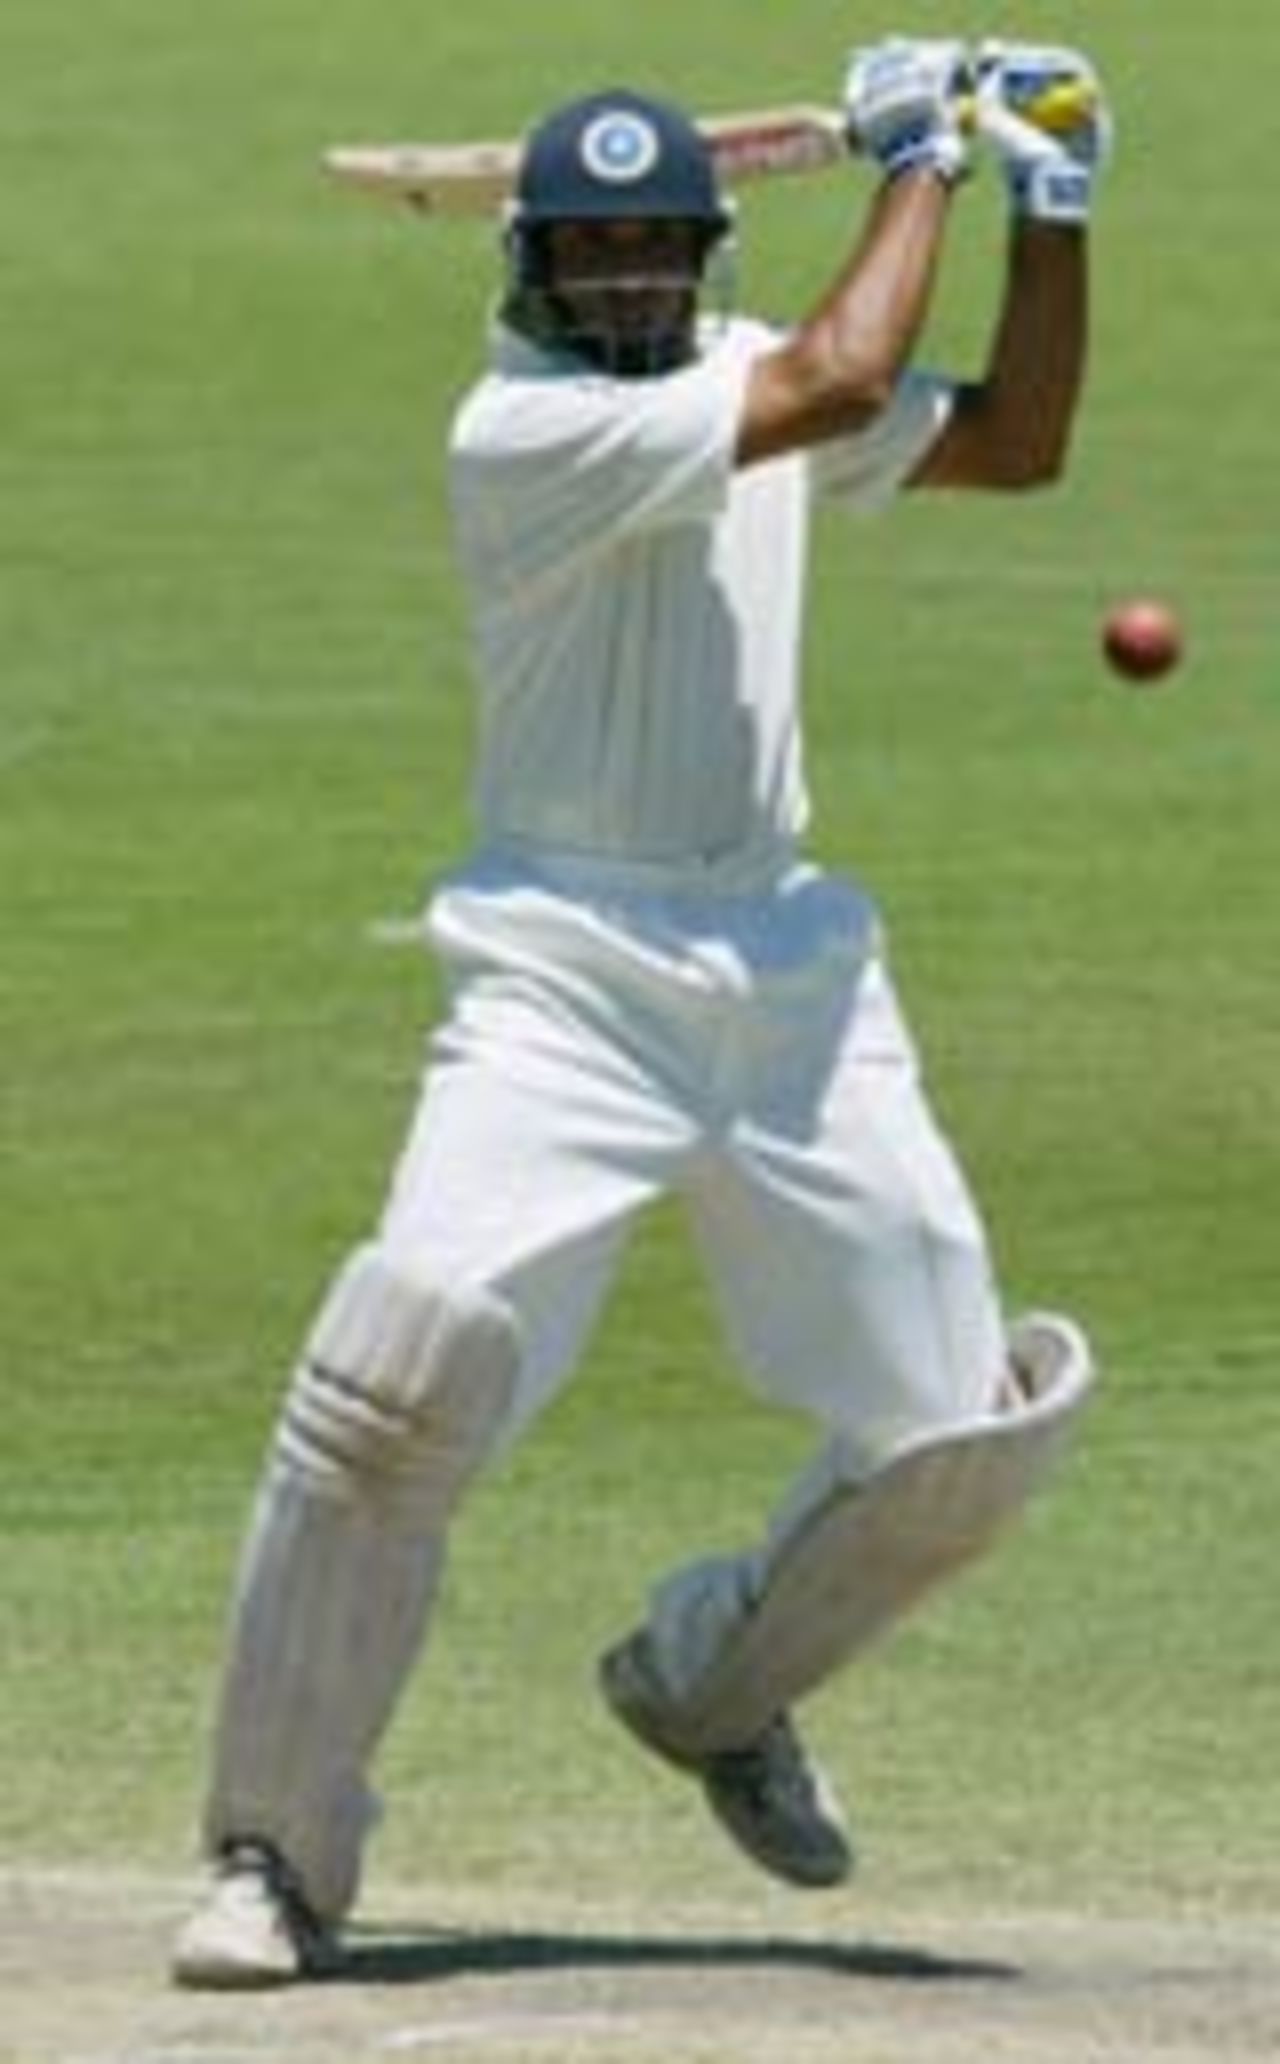 Laxman drives with authority, Australia v India, 2nd Test, Adelaide, 3rd day, December 14, 2003